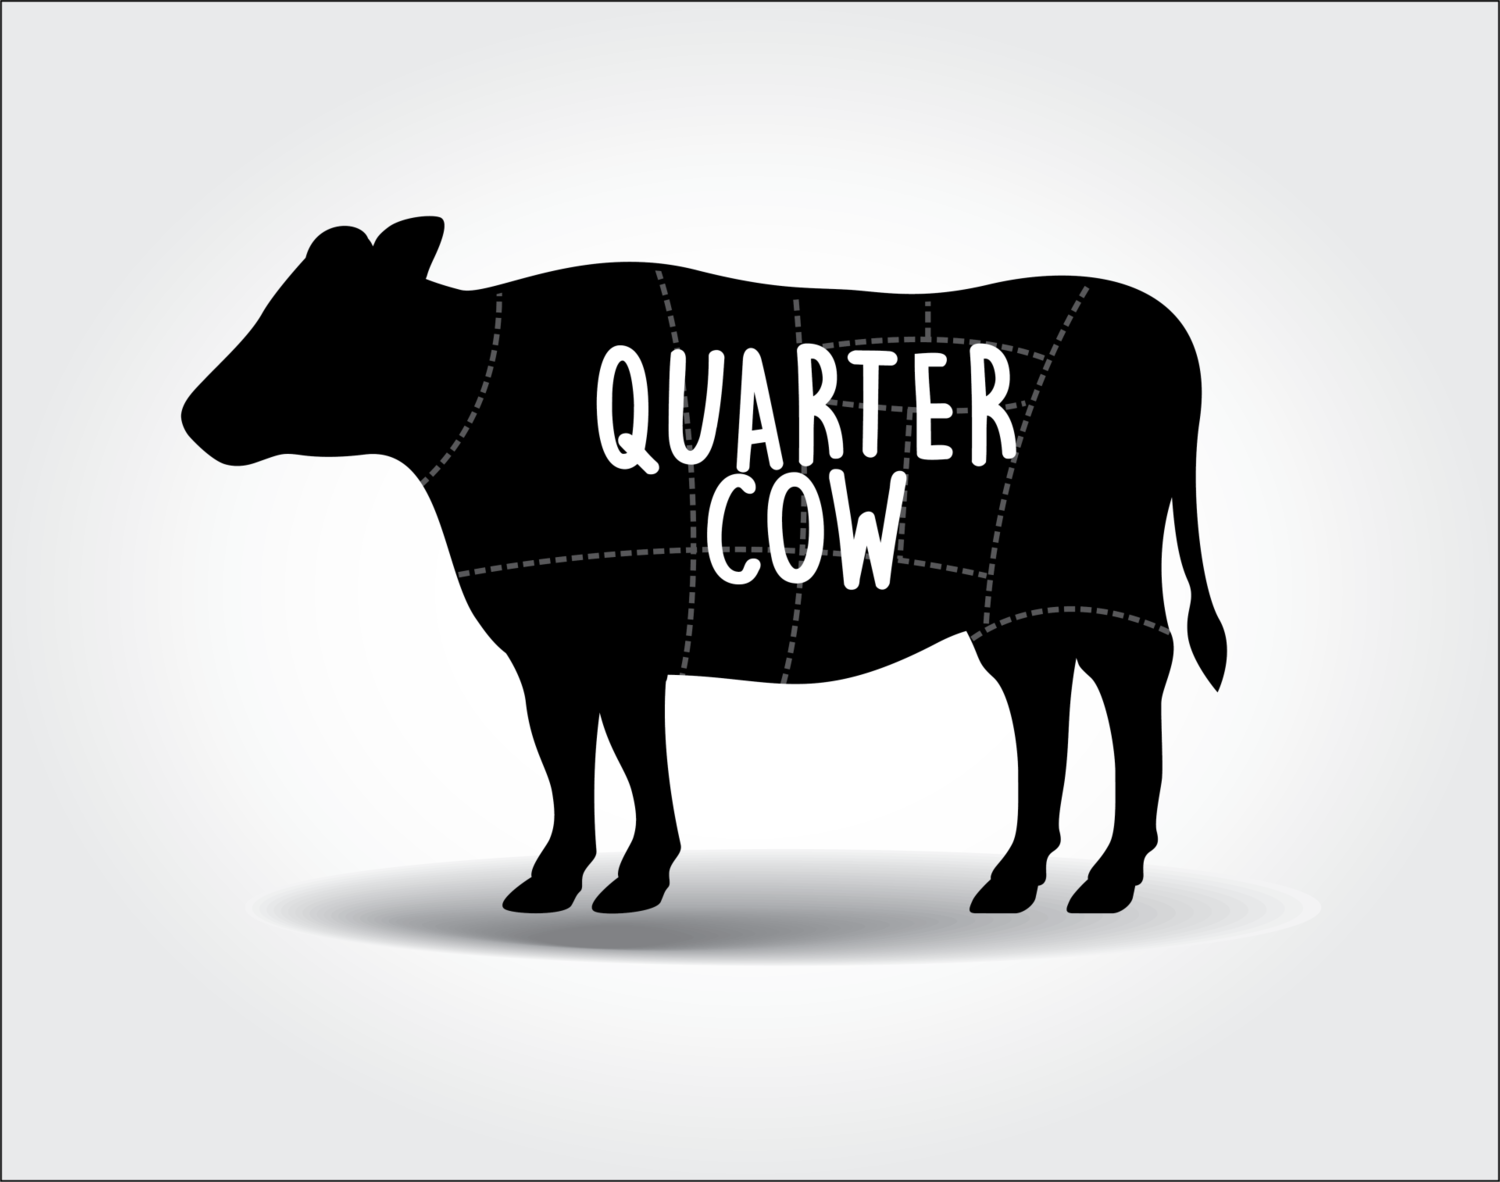 QUARTER COW The 1/4 calf is now available at 8.75 lb. If you choose to